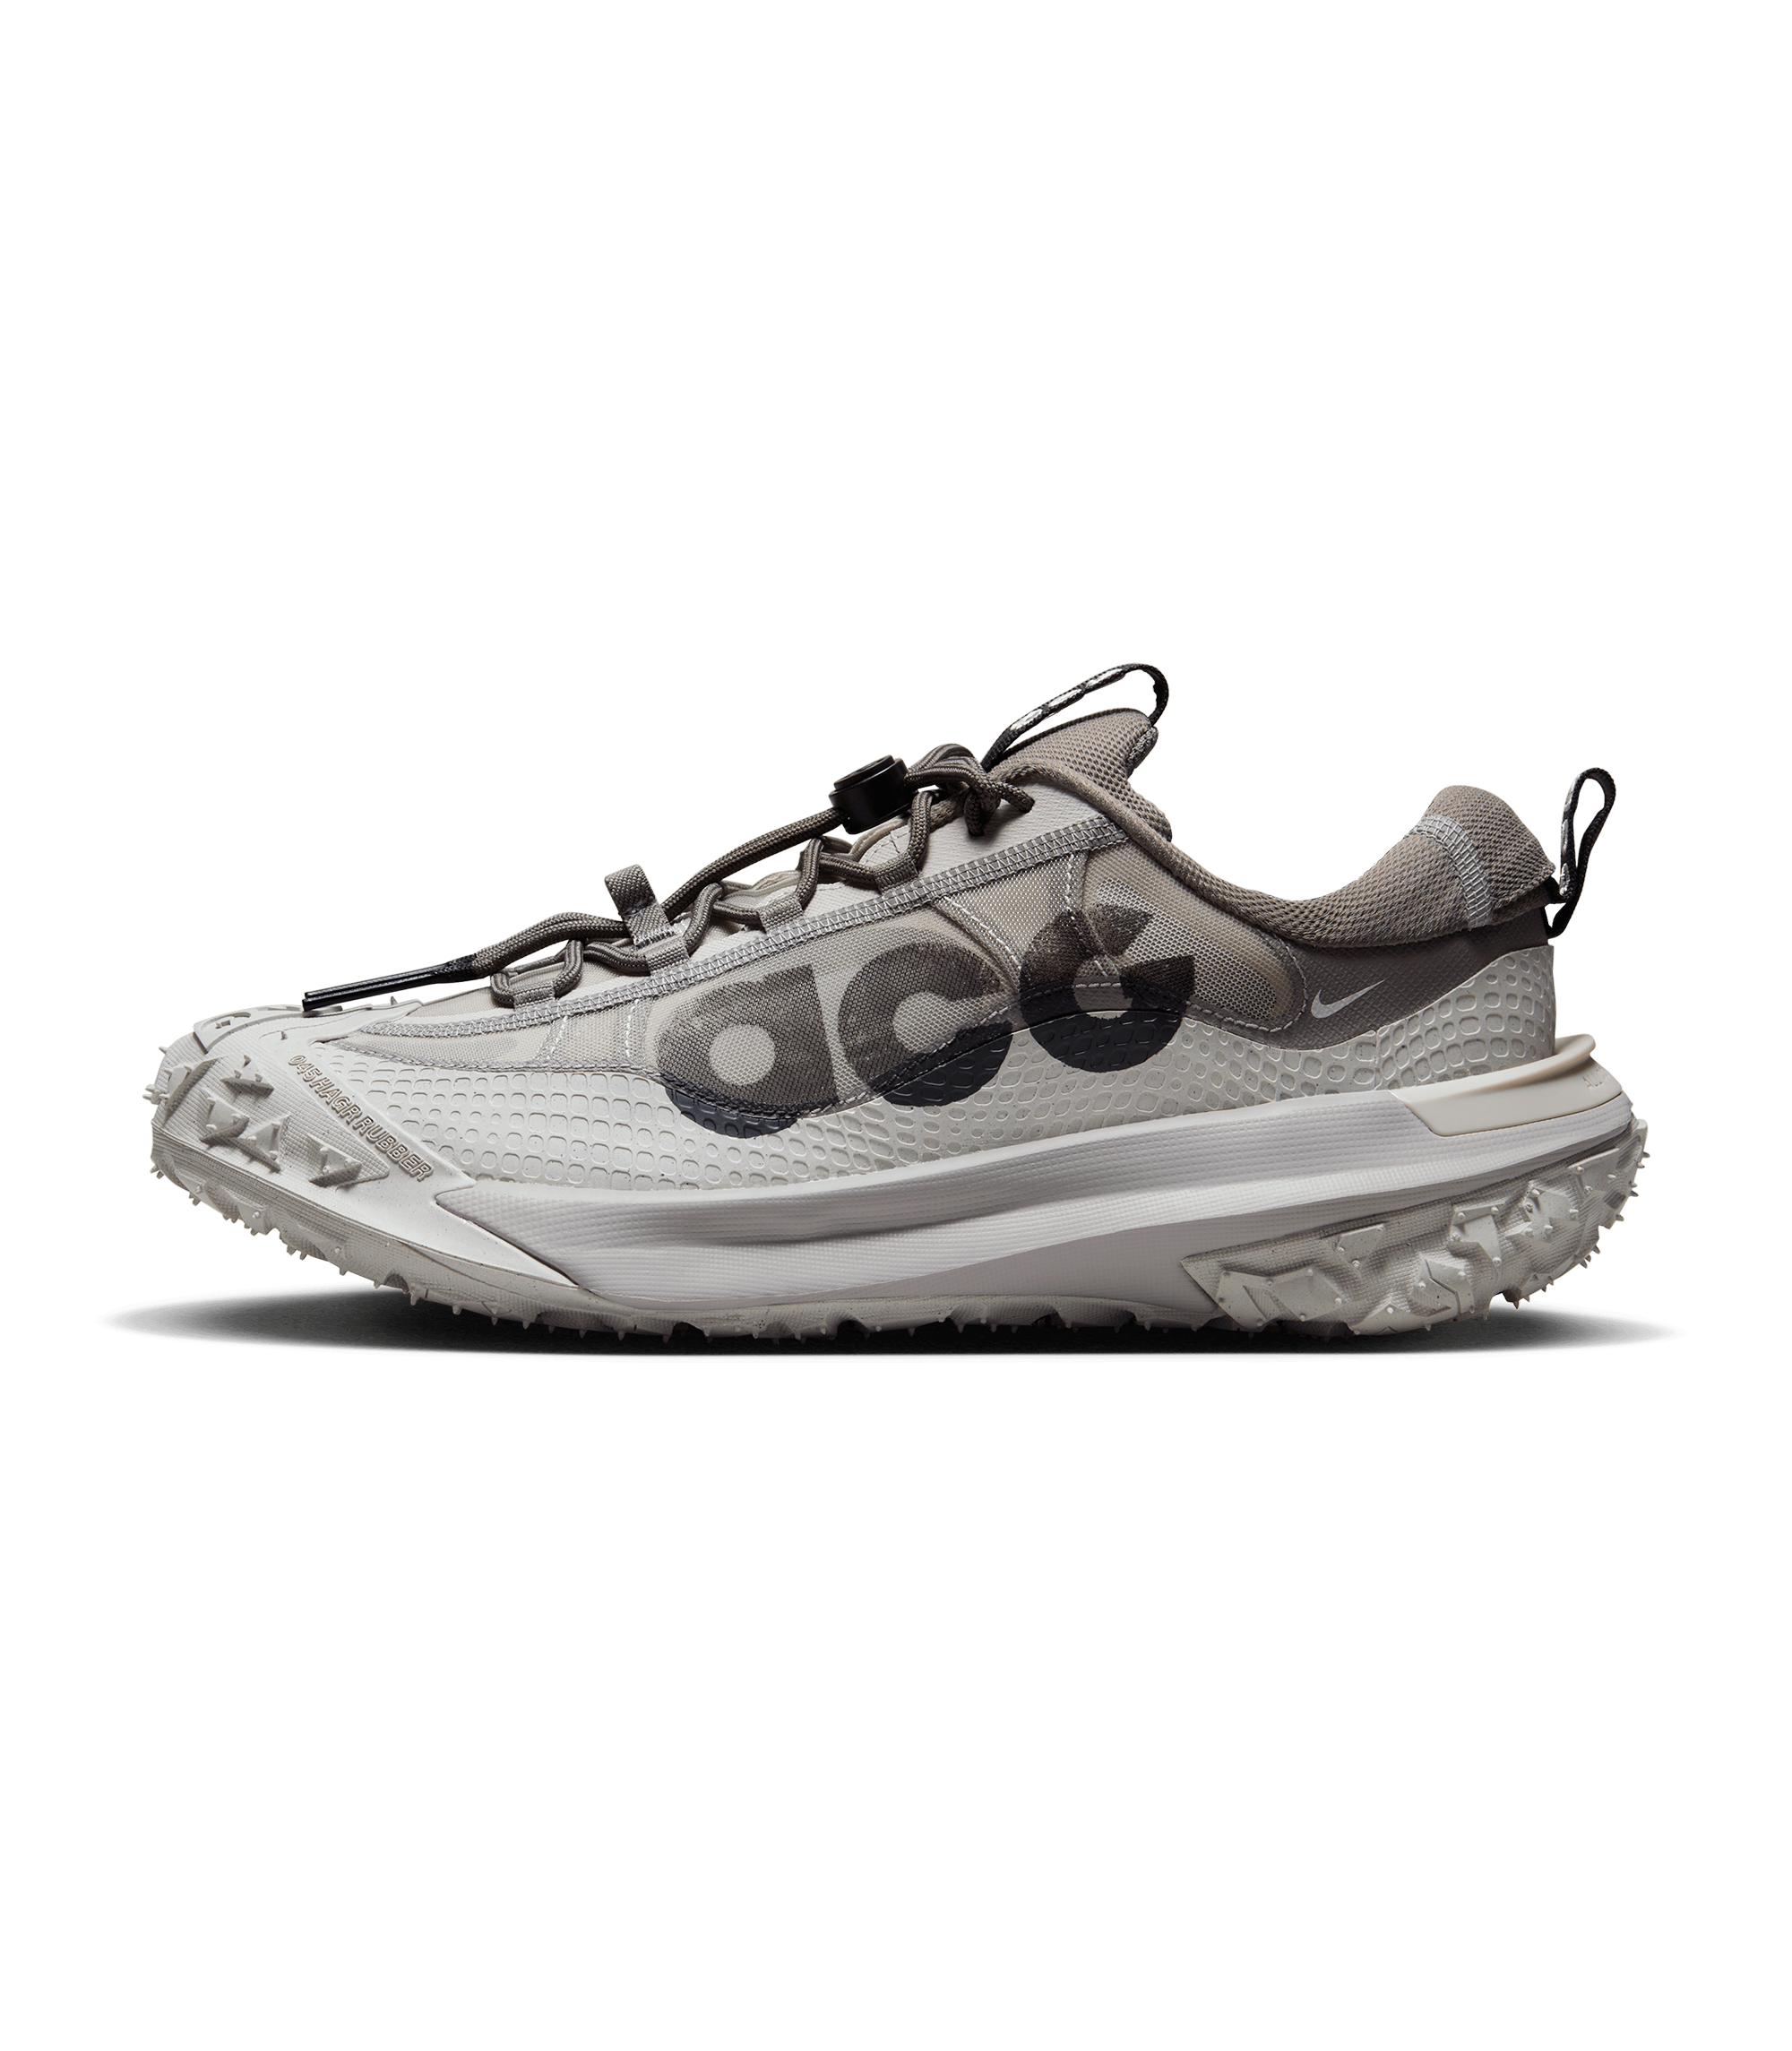 ACG MOUNTAIN FLY 2 LOW - LT IRON ORE / BLACK FLAT PEWTER